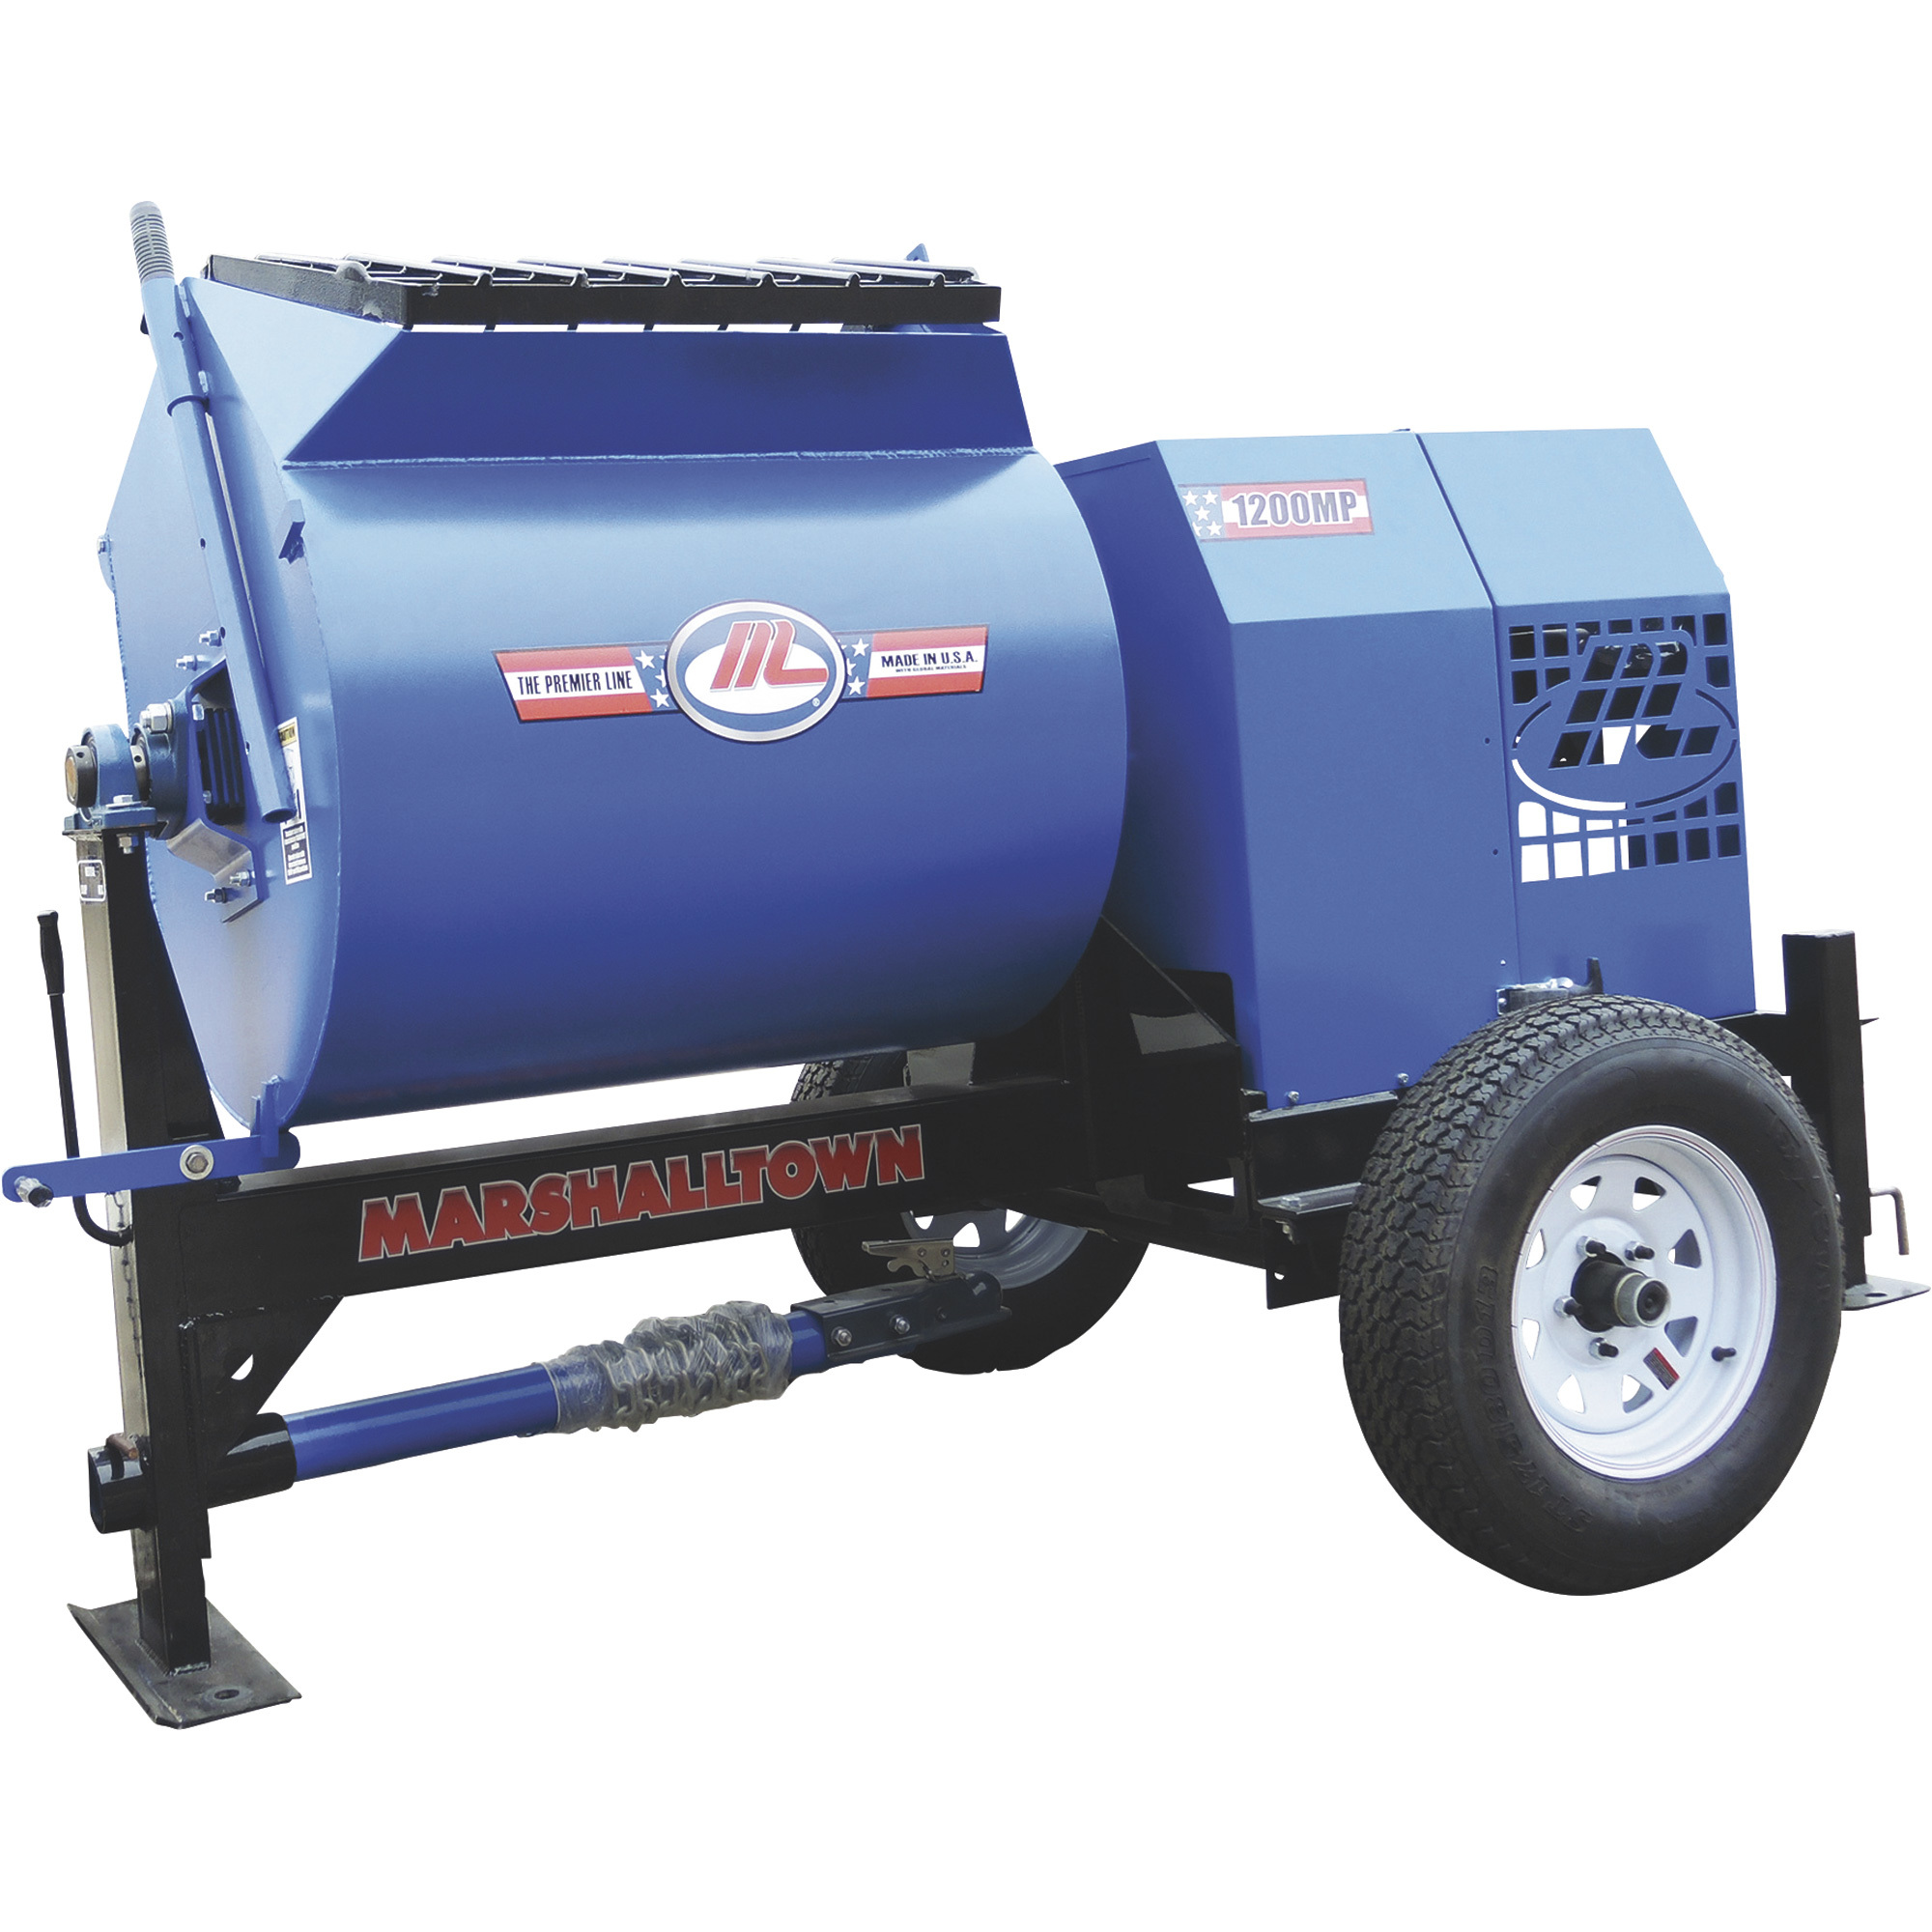 Marshalltown 1200MP Mortar/Plaster Mixer with Ball Tow Outrigger and 8 HP Gas Engine â Model 1200MP8HBO